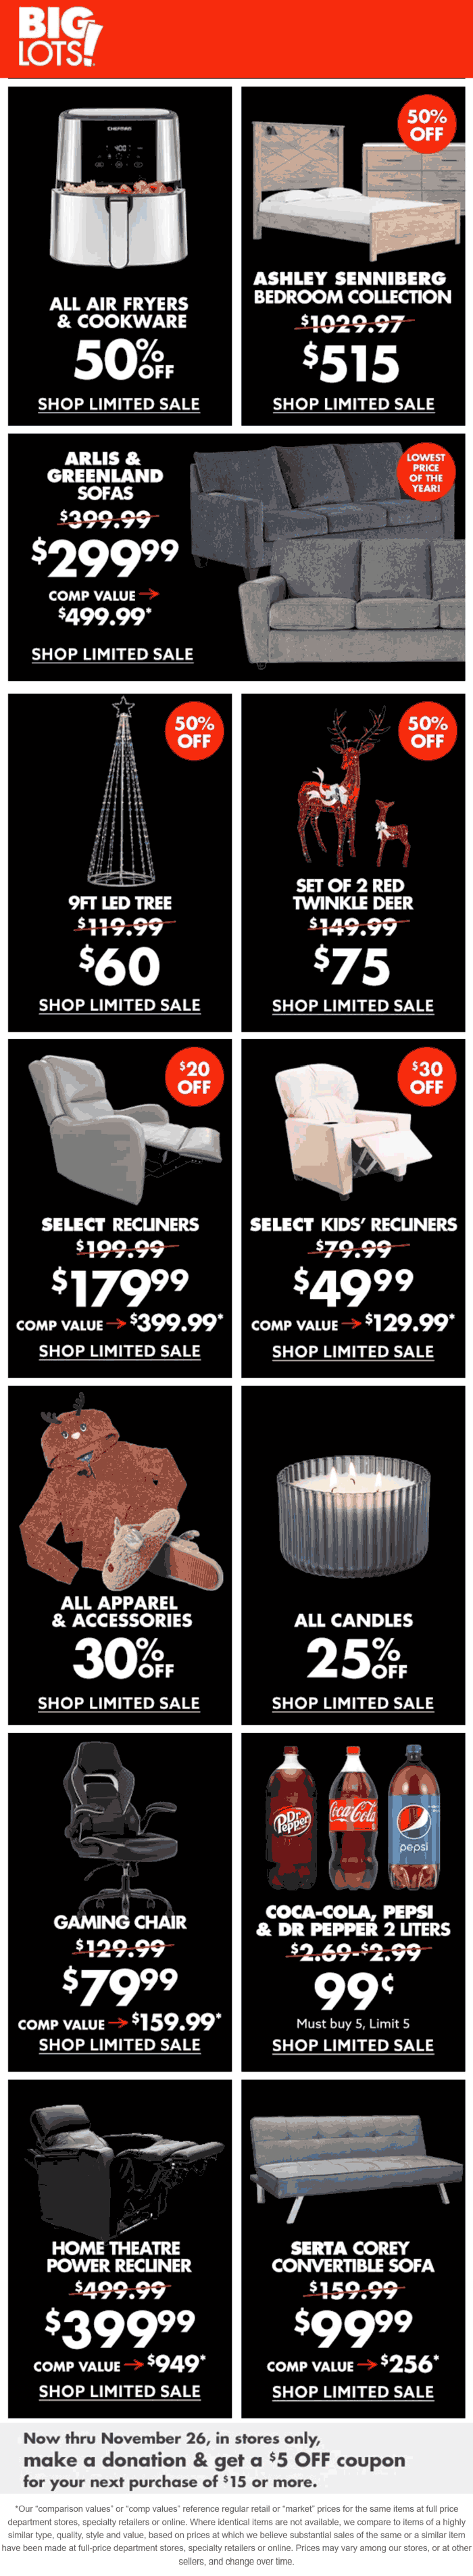 $300 couches, 50% off bedroom collection & more at Big Lots #biglots